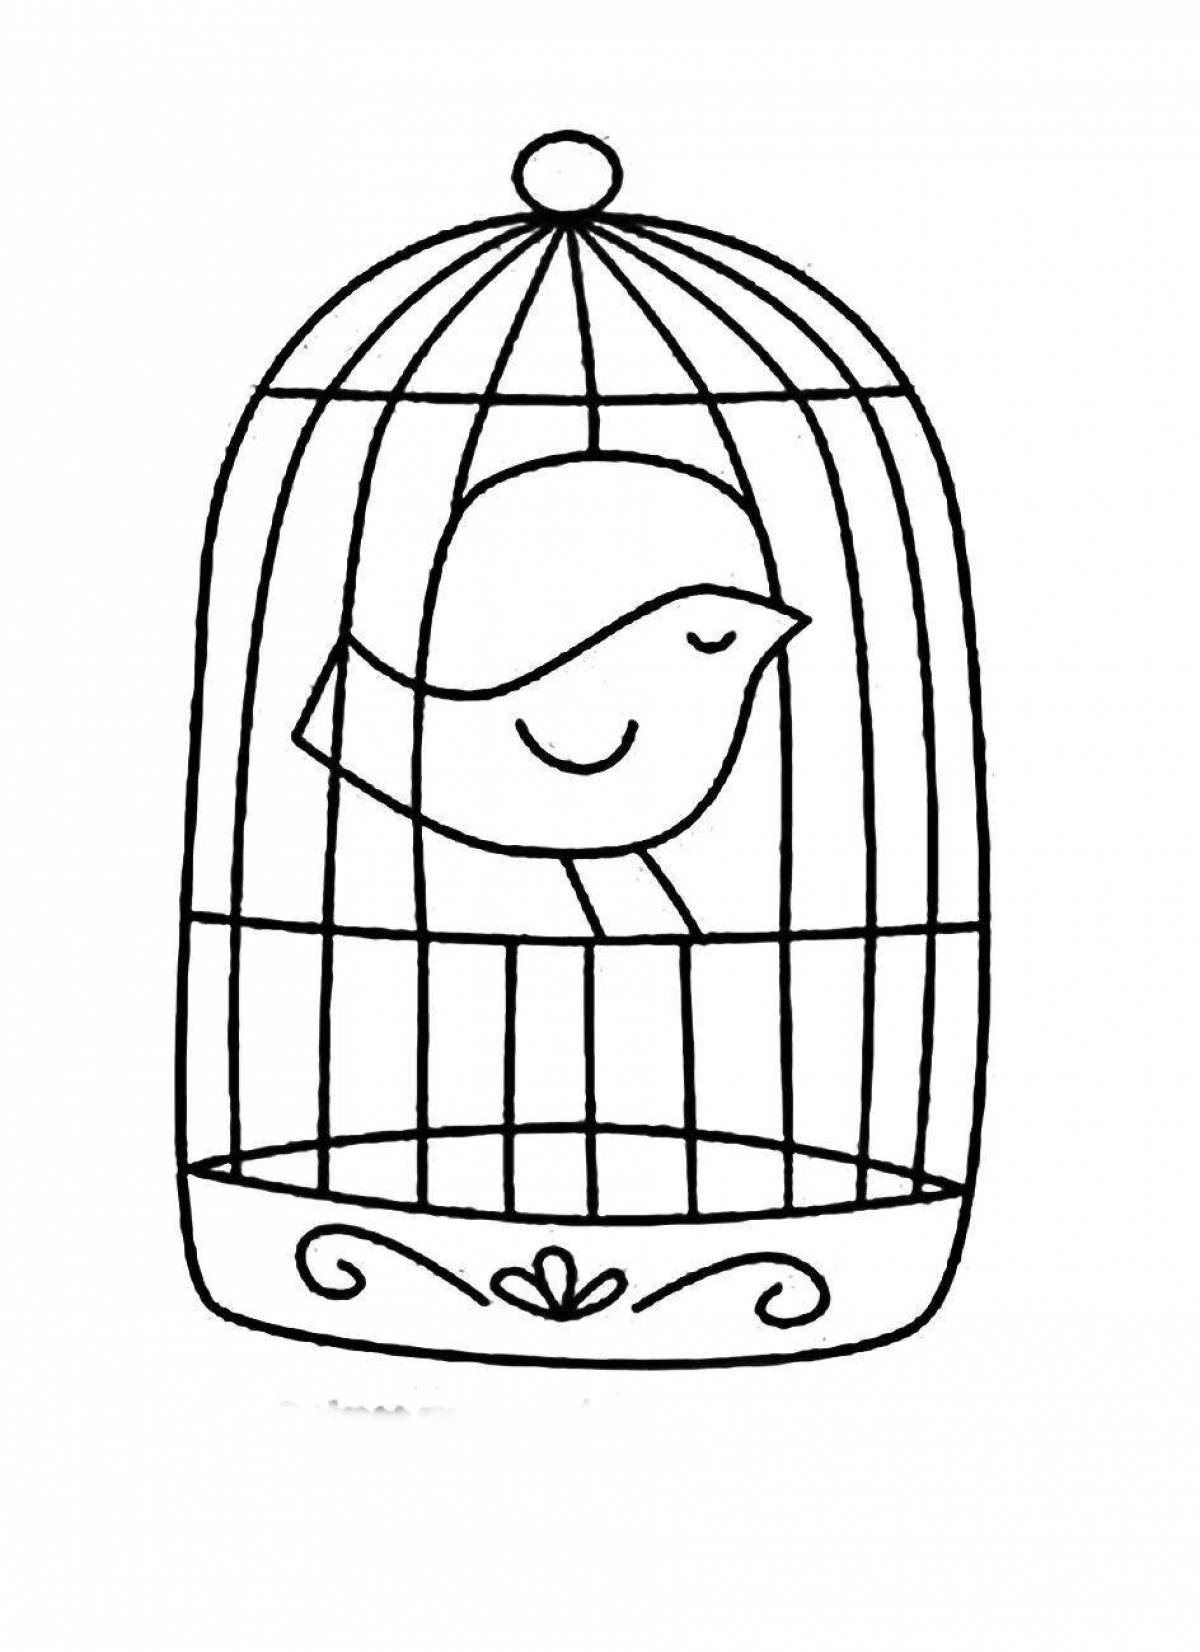 Caged parrot #1